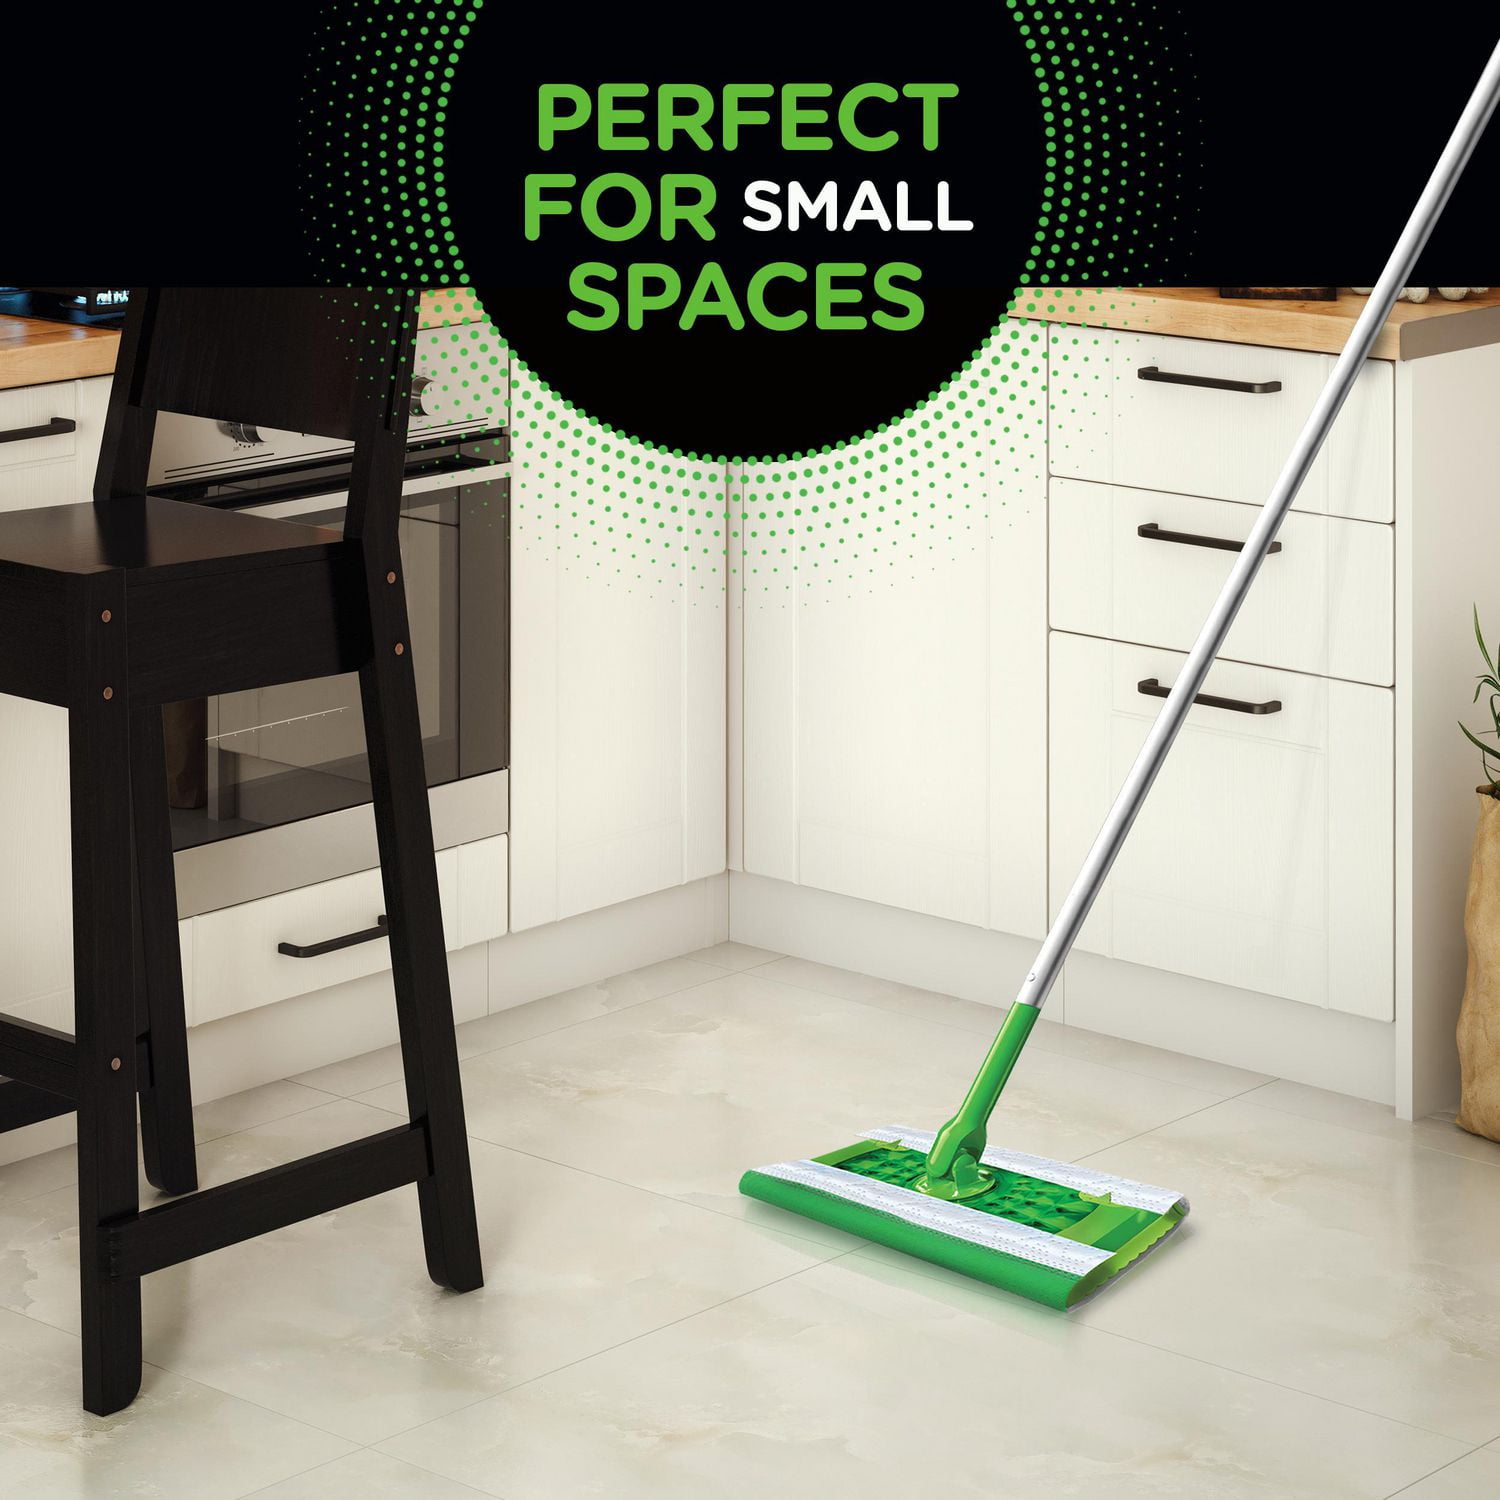 Swiffer Sweeper Dry + Wet All Purpose Floor Mopping and Cleaning Starter Kit  with Heavy-Du